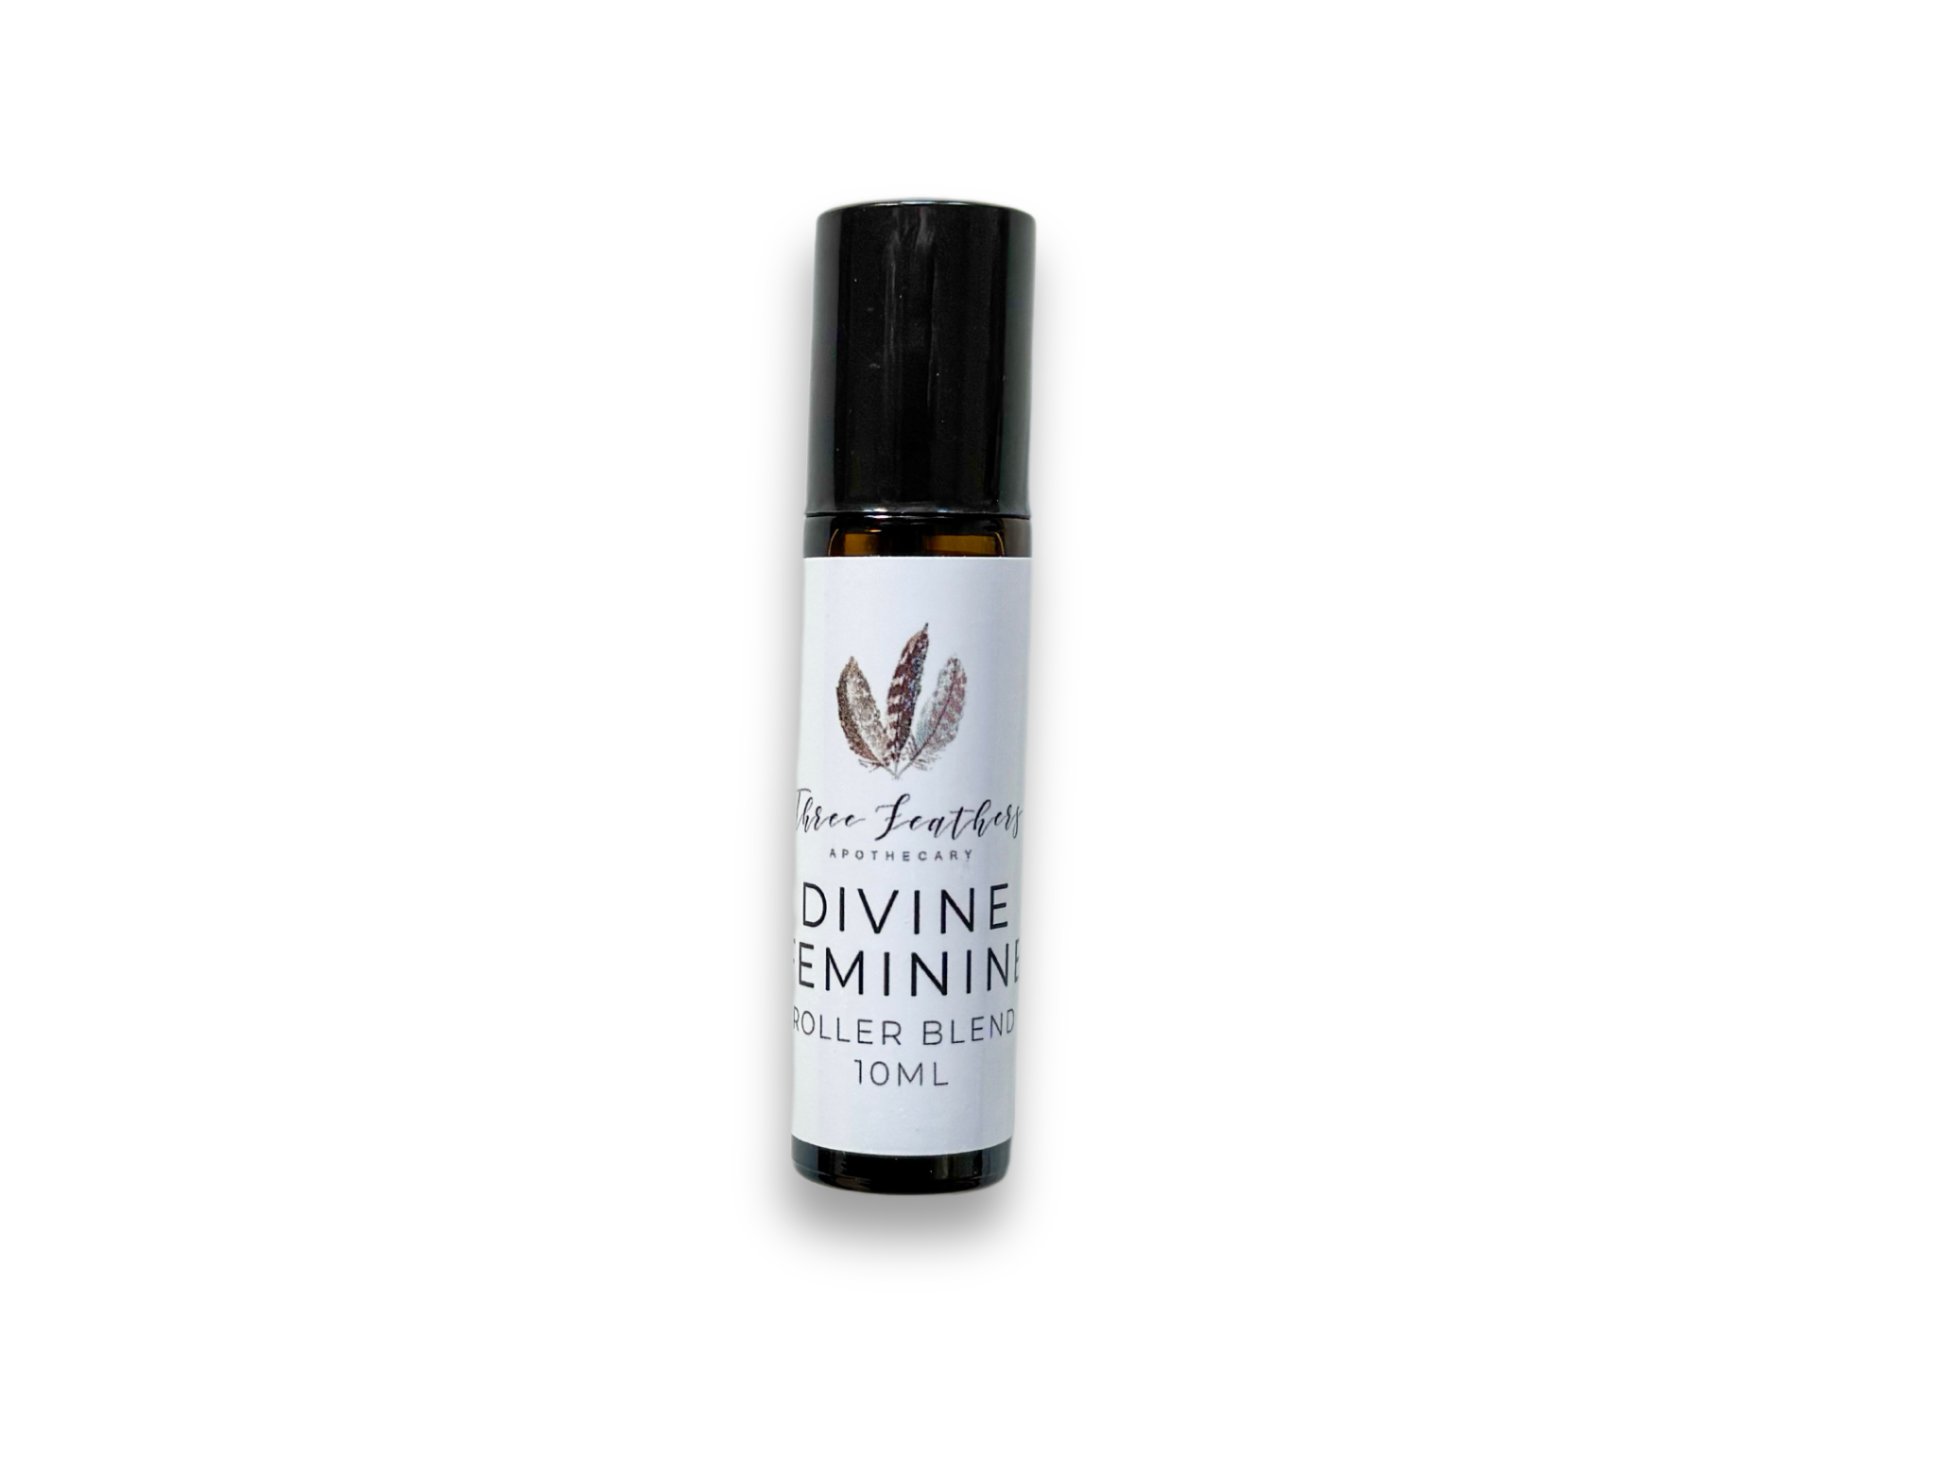 Divine Feminine 10mL Roller Blend || Three Feathers Apothecary